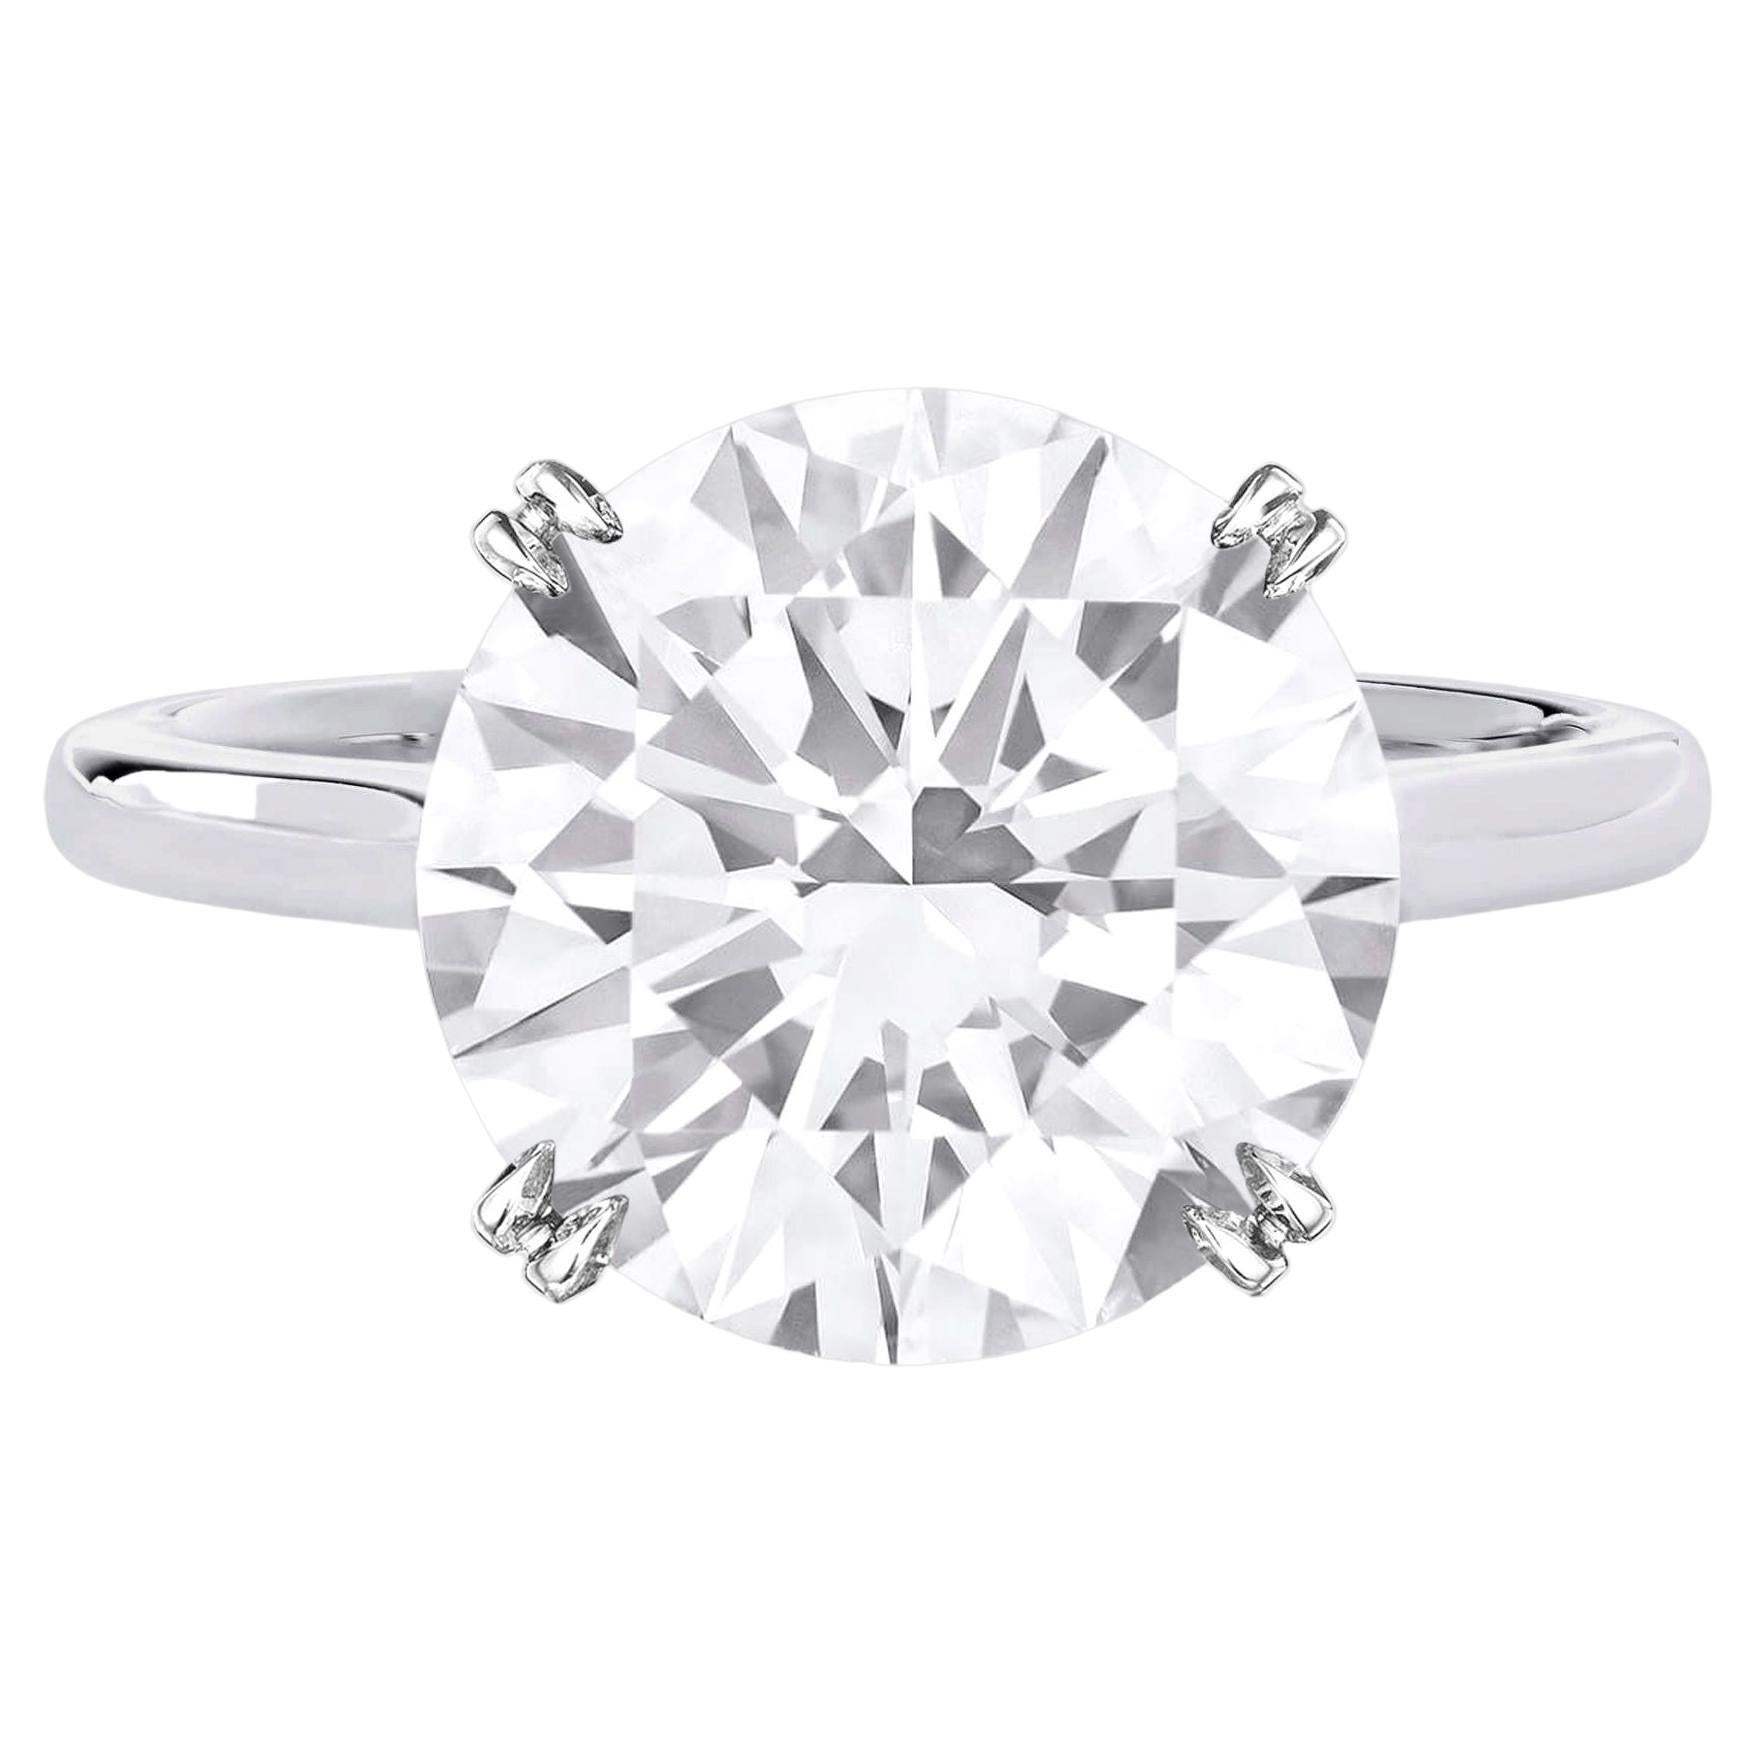 Indulge in the timeless allure of this GIA Certified 5 Carat Round Cut Diamond Solitaire Ring, a true embodiment of elegance and refinement. At its core gleams a magnificent round cut diamond, certified by the prestigious Gemological Institute of